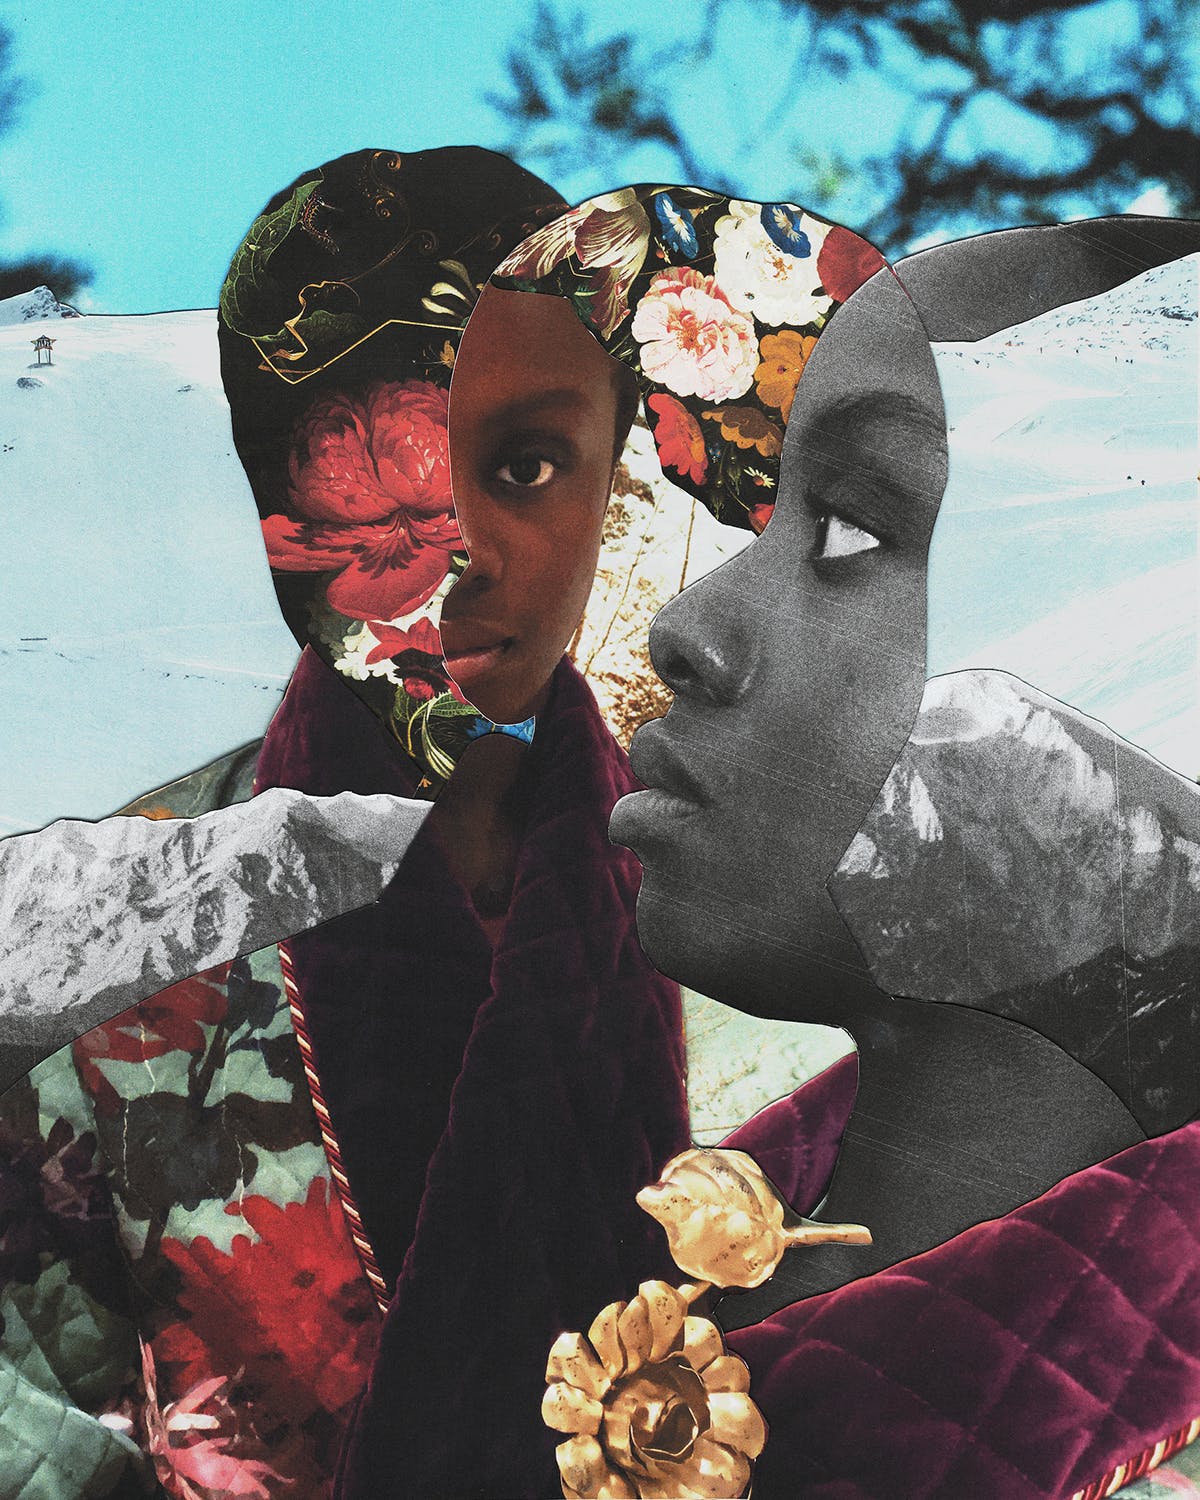 Jazz Grant’s collage art is a patchwork of history and emotion